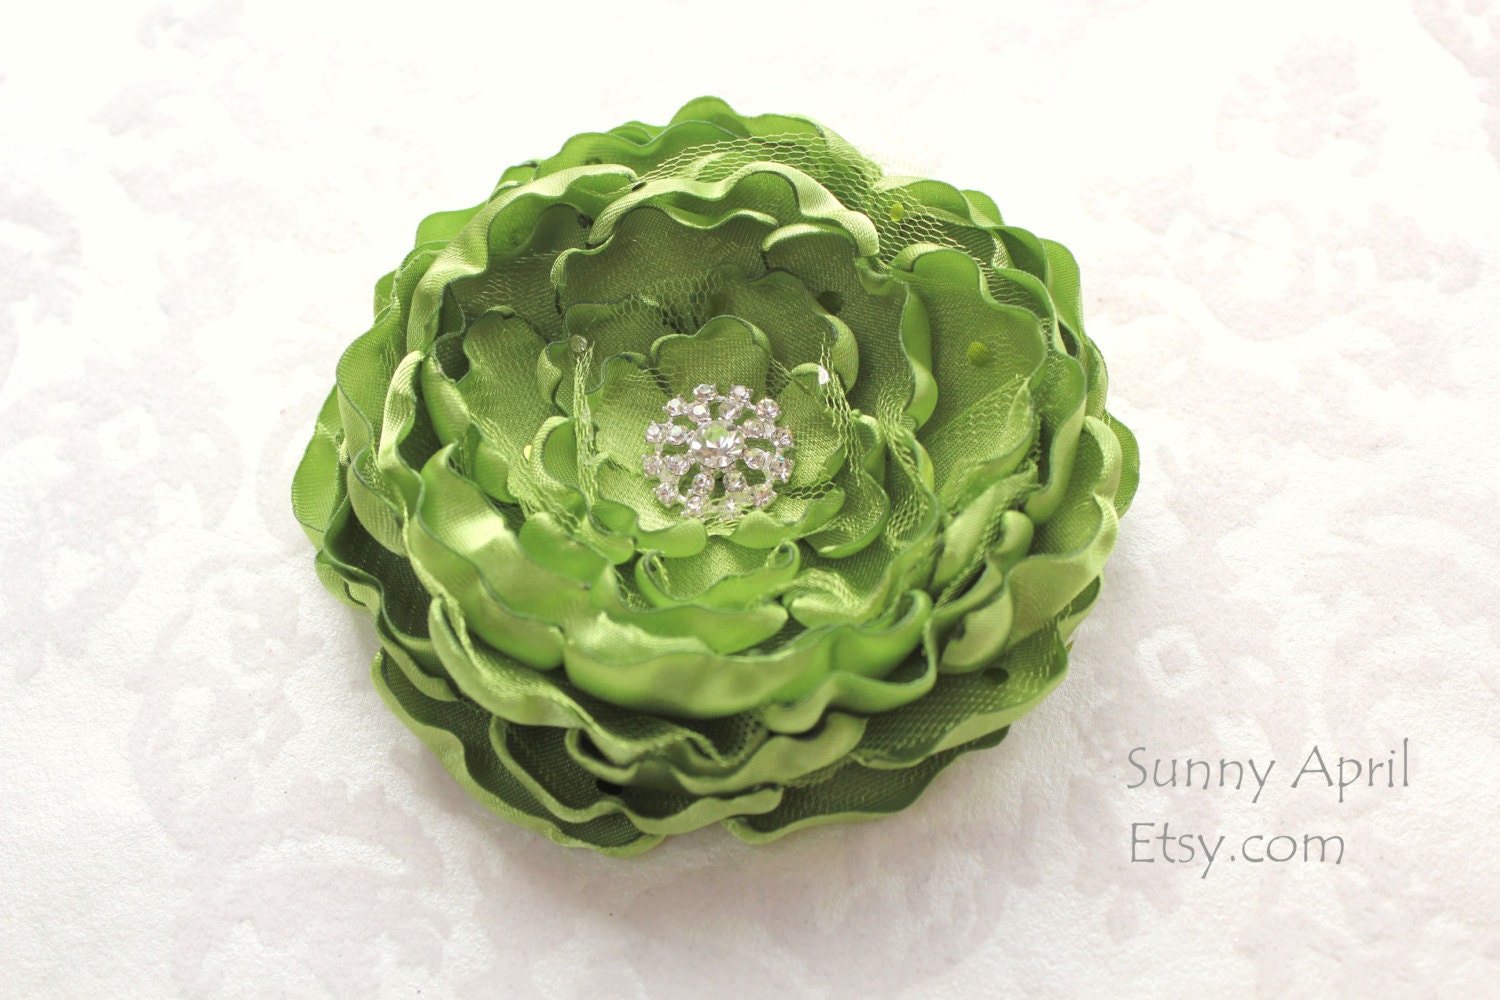 Apple Green/ Pistachio Flower Hair Clip/ Brooch/ Bridesmaid's Wedding Accessory/ Free Shipping on Additional Items - SunnyApril